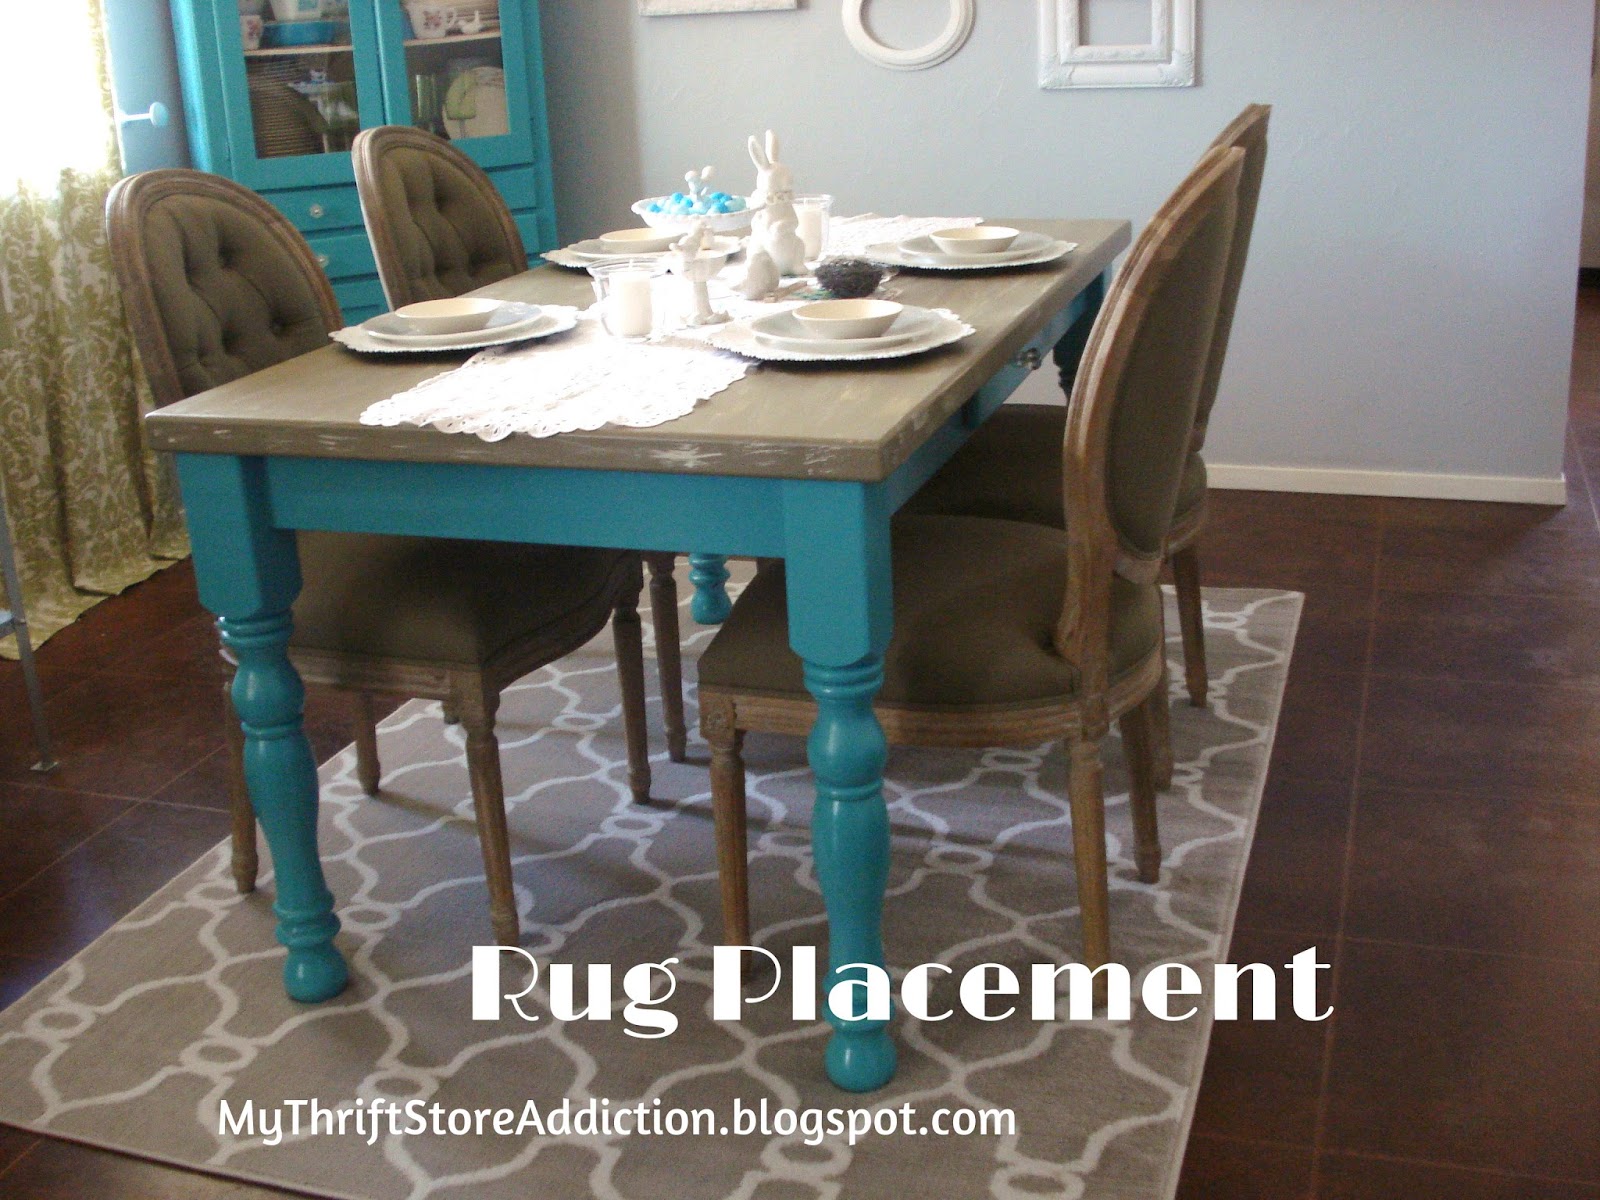 Rug placement